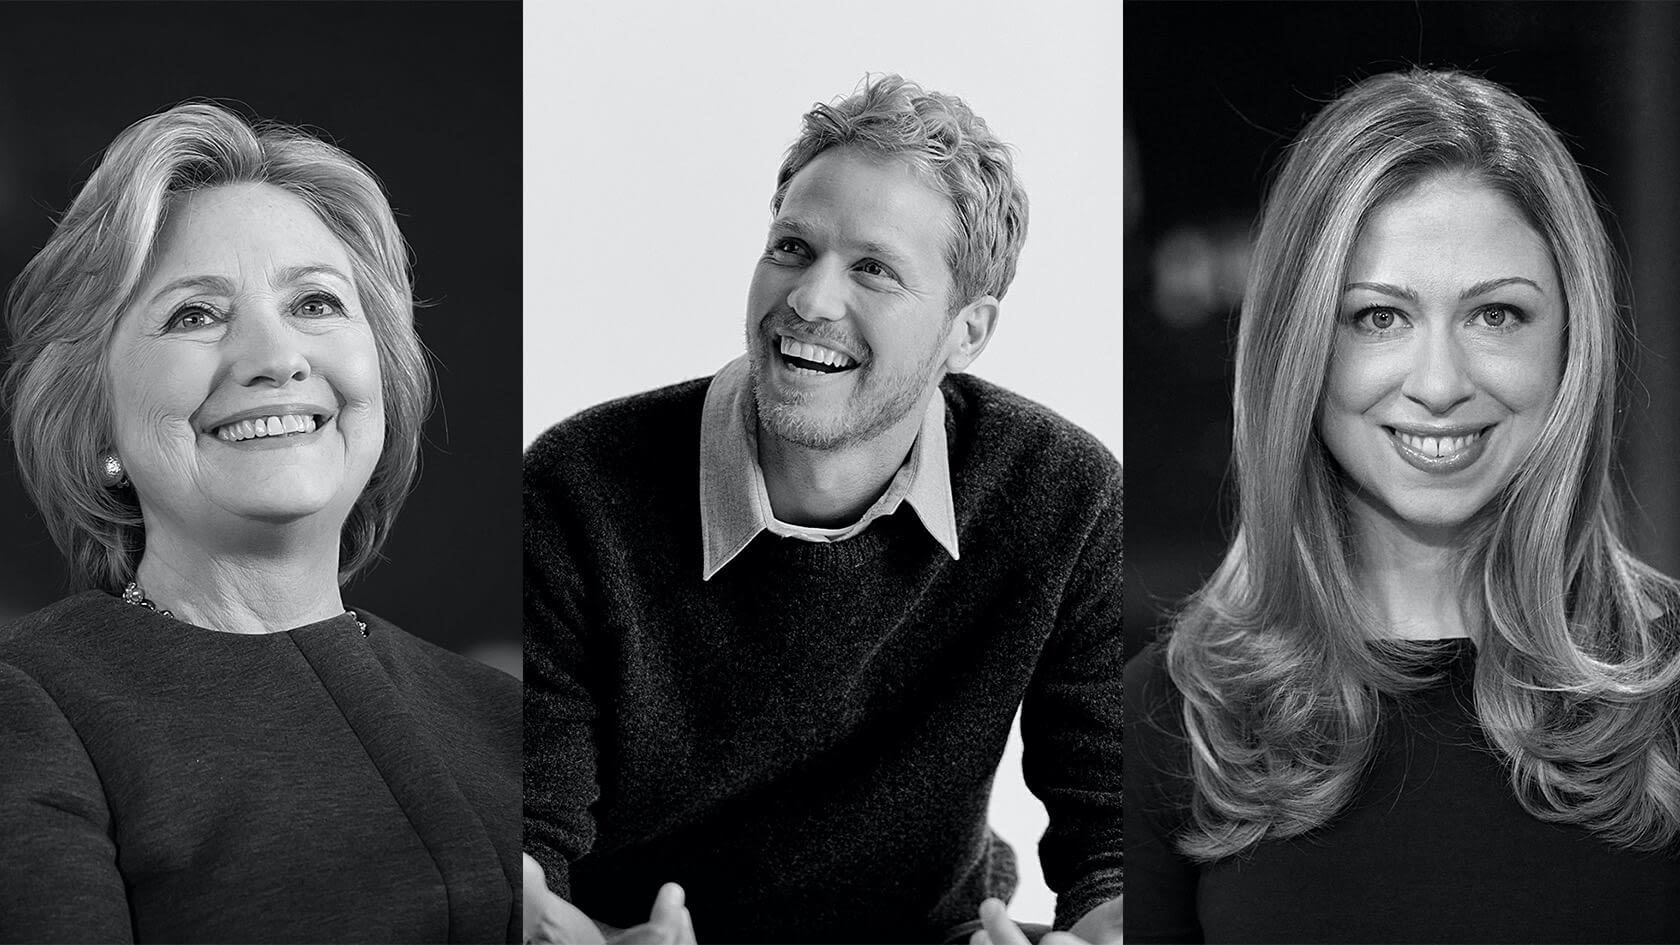 HiddenLight Productions founders - Hillary Clinton, Chelsea Clinton and Sam Branson smiling side by side